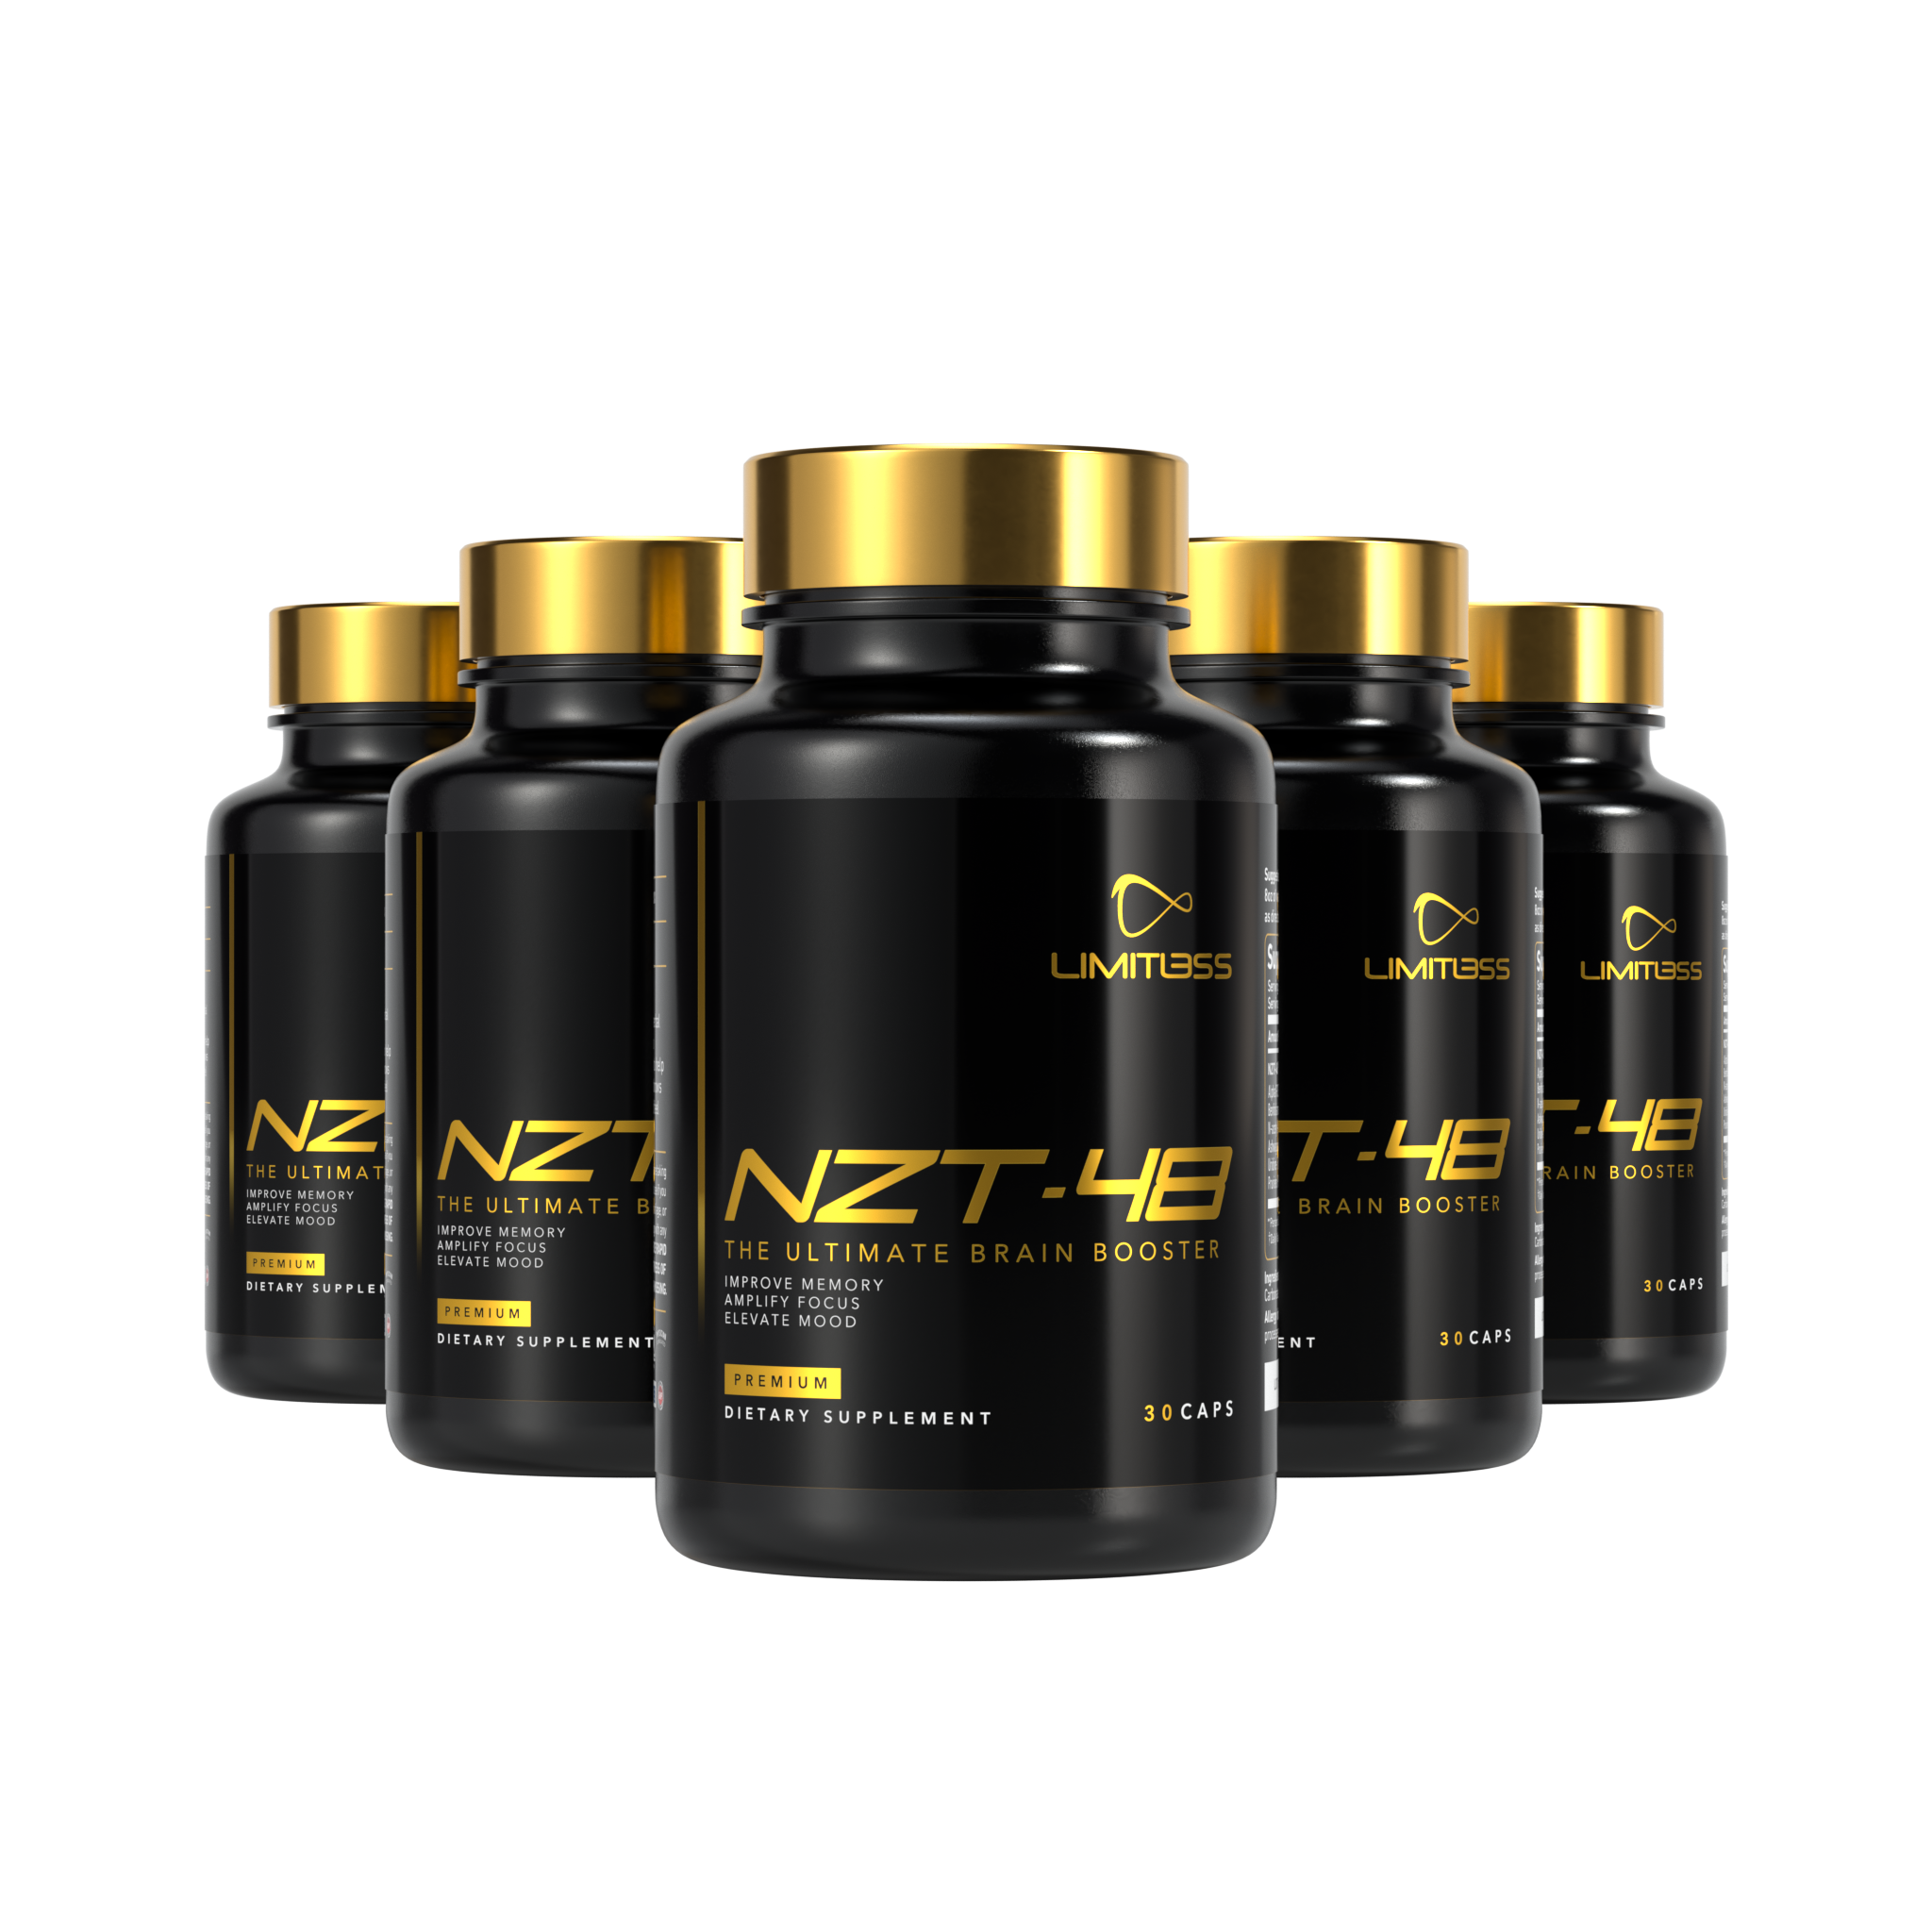 The Real Limitless Pill, NZT-48 - Order Now